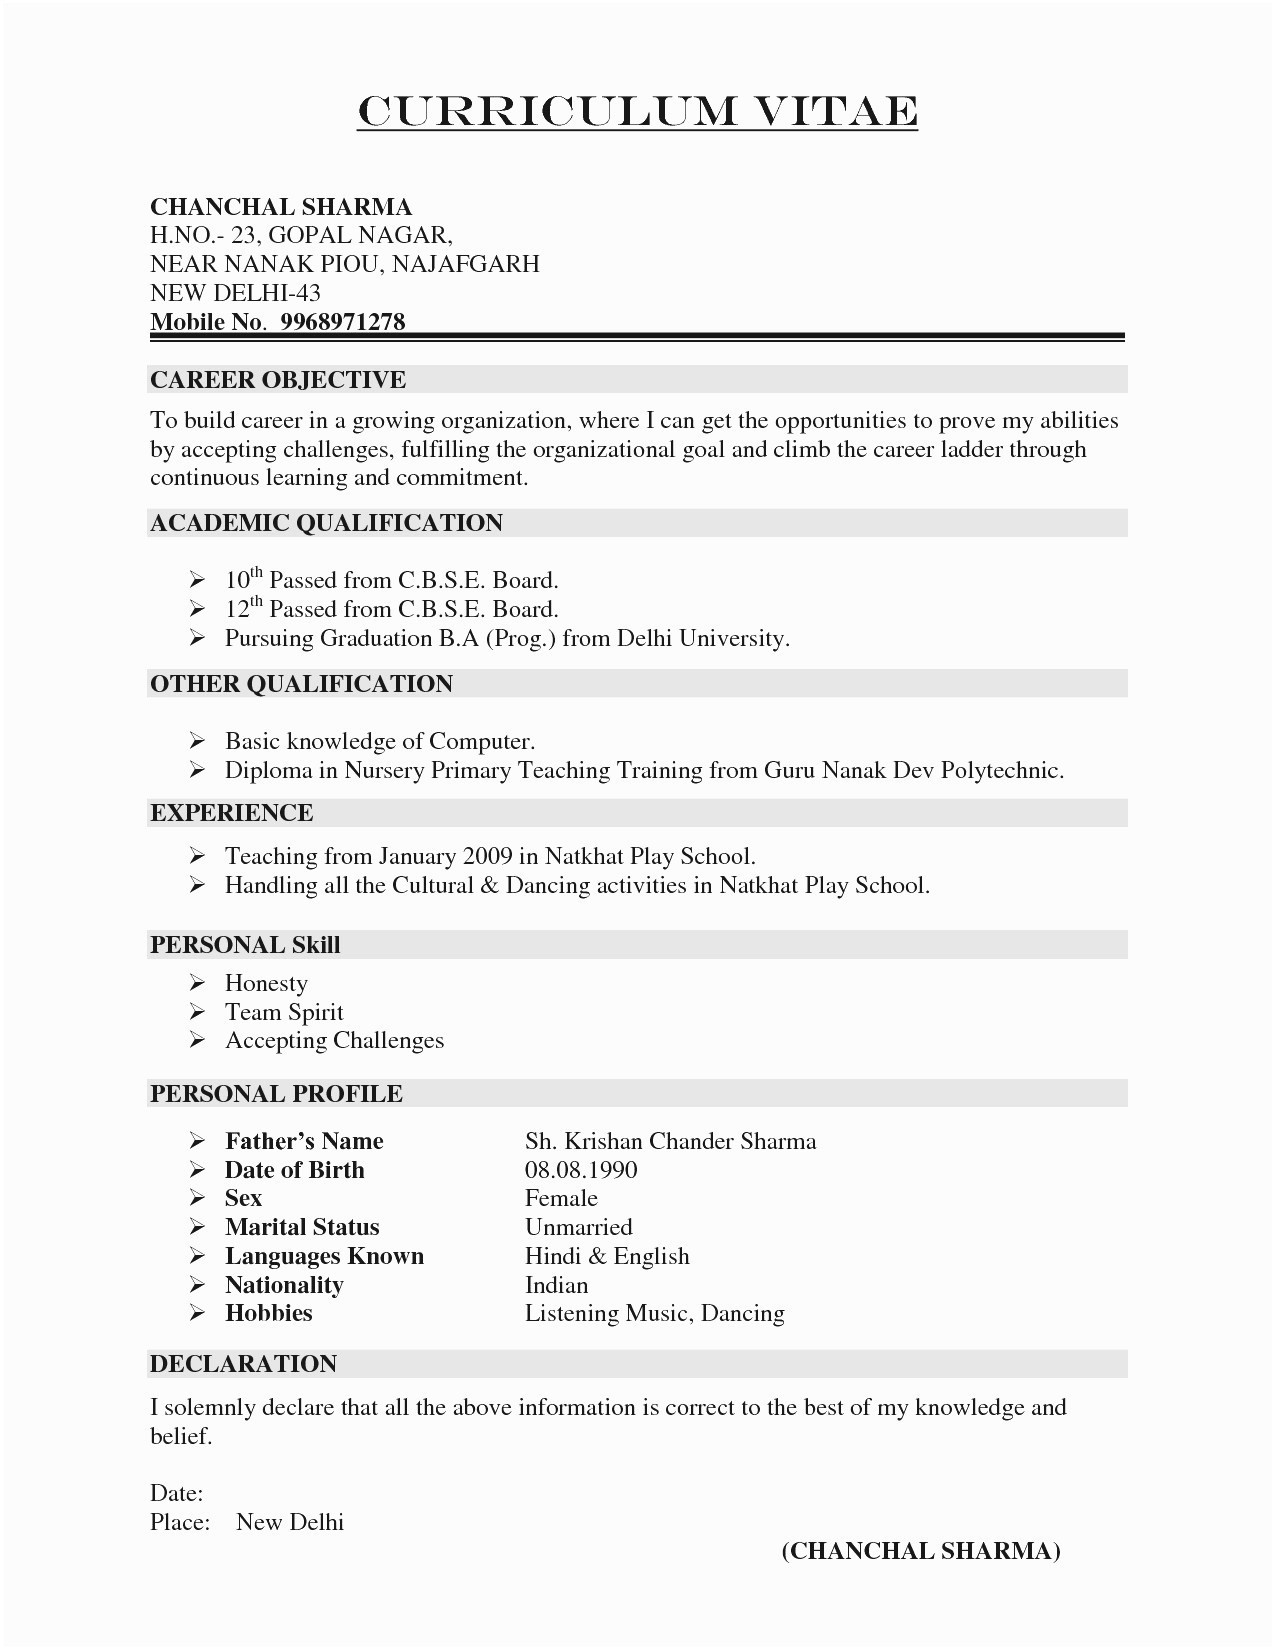 Free Job Cover Letter Template - Cover Letter Resume Template Best Free Microsoft Resume Templates